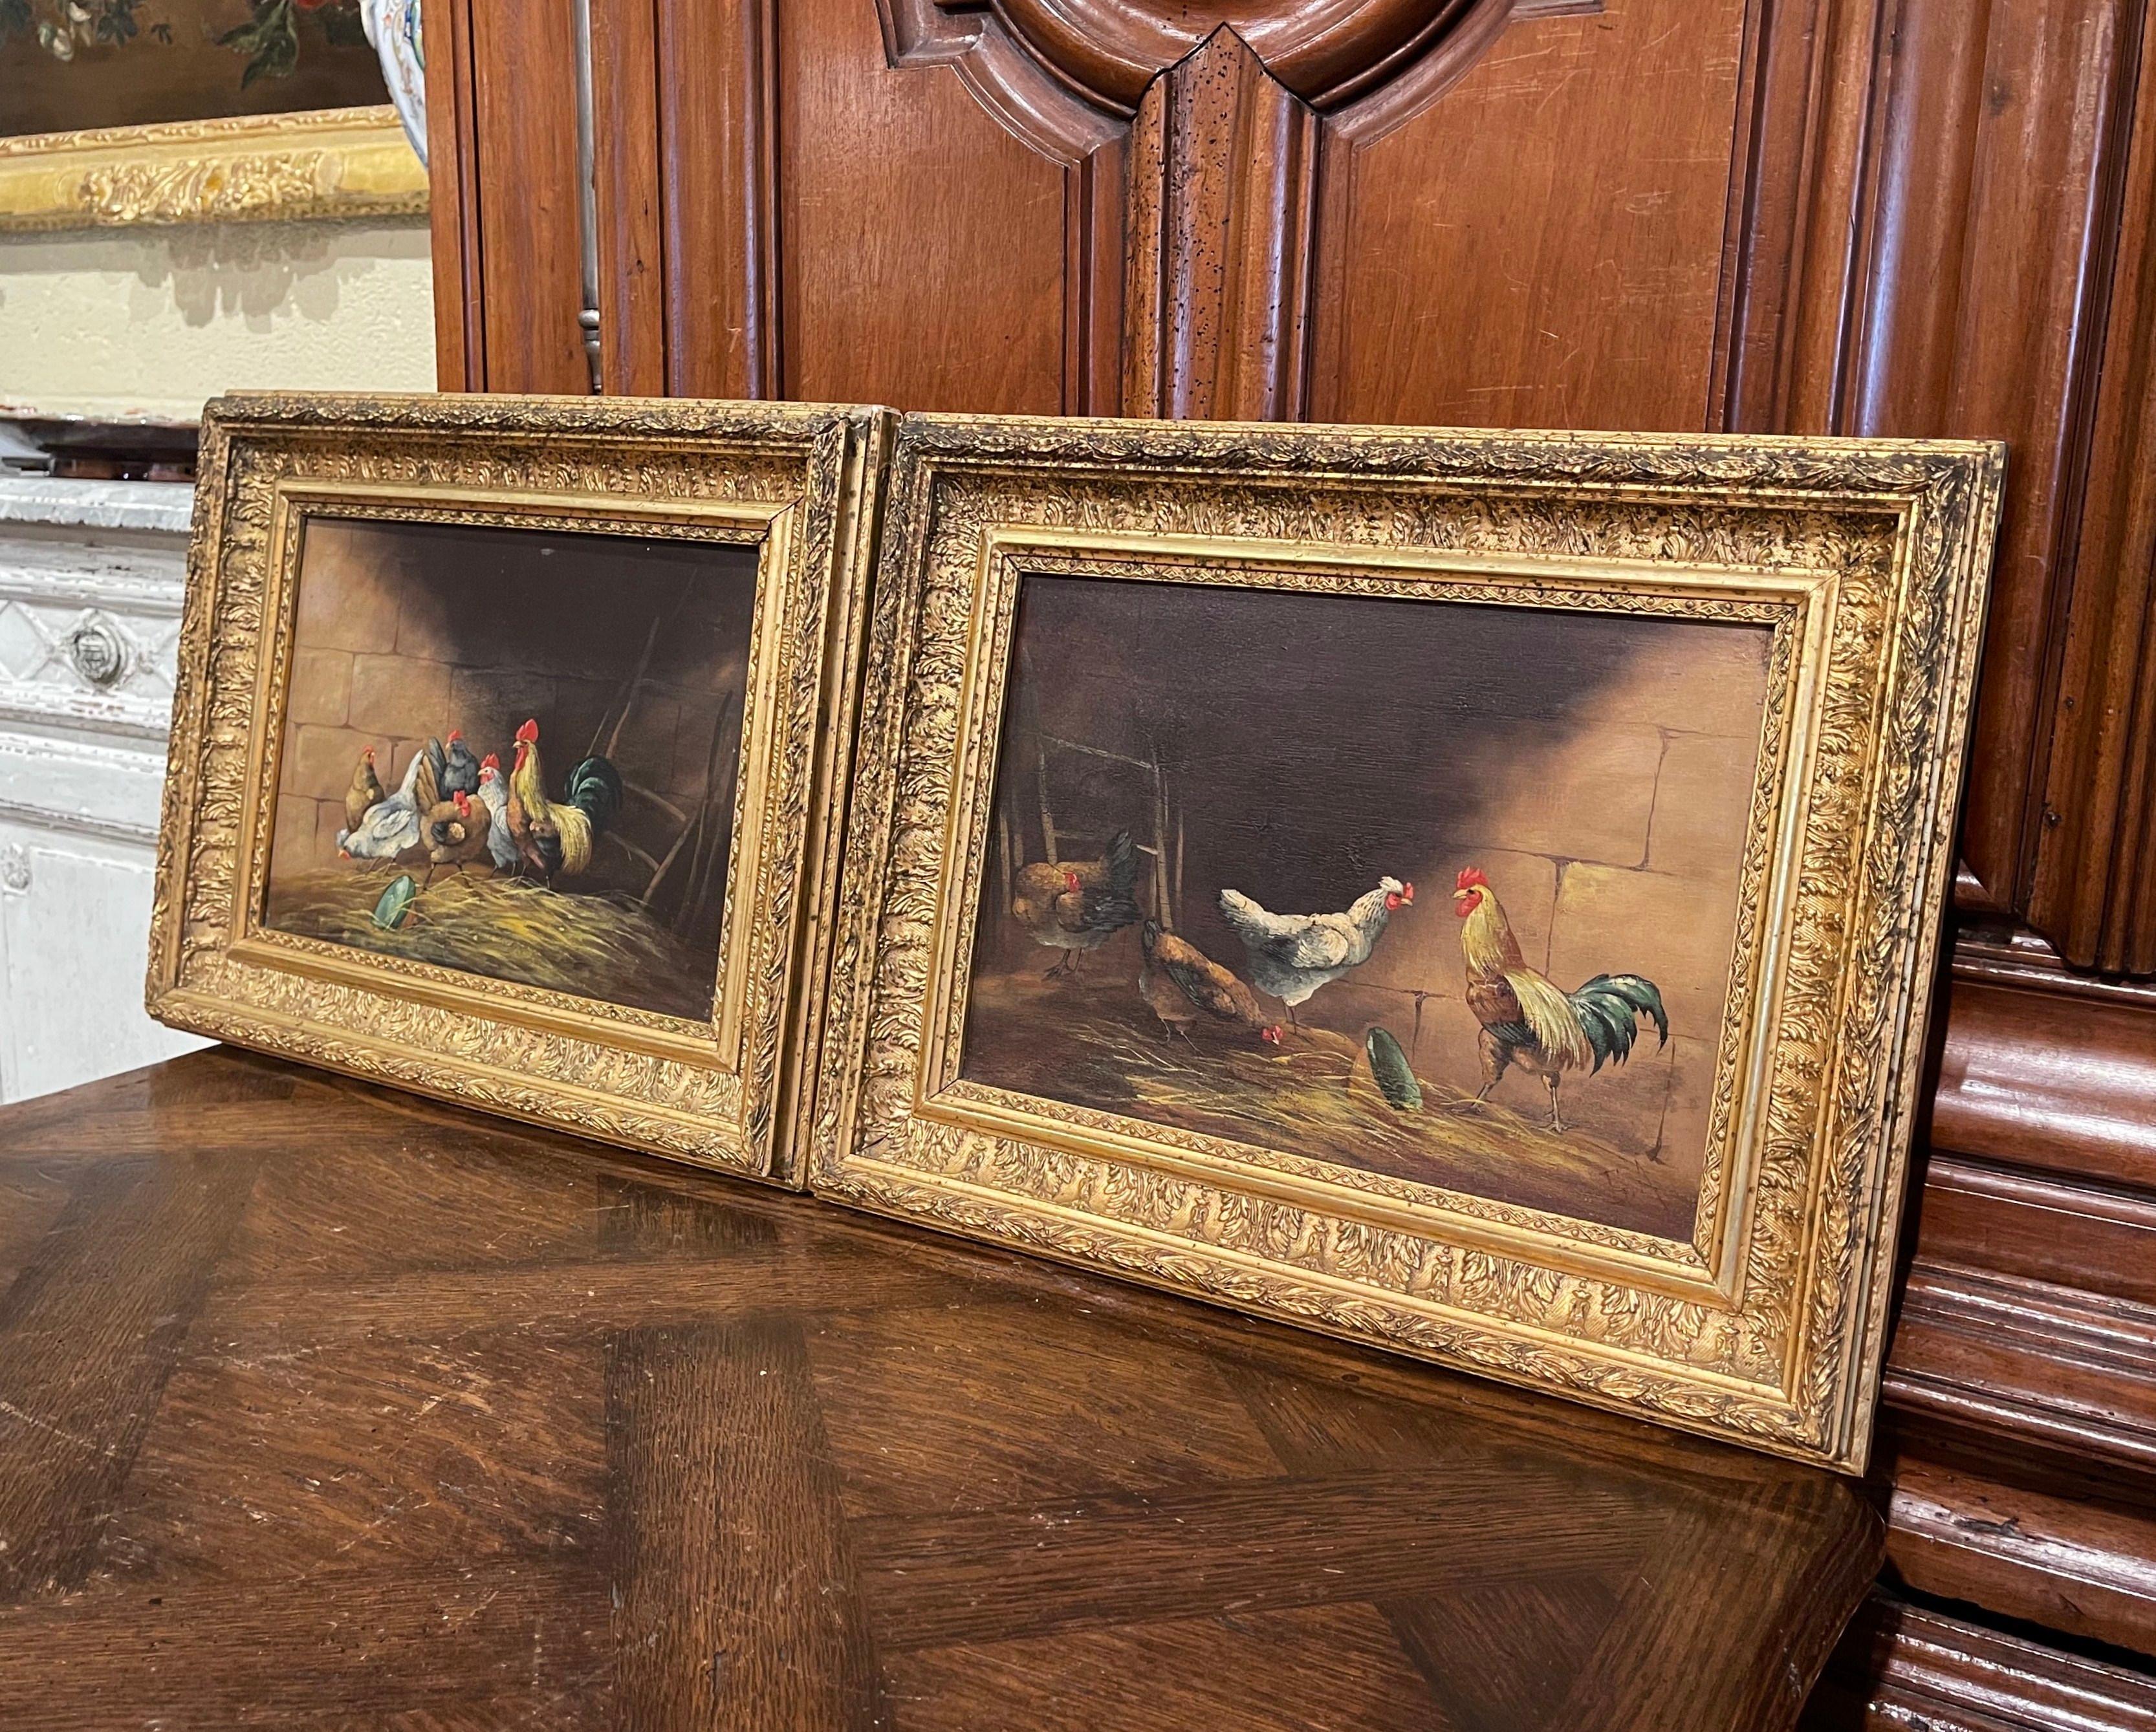 Crafted in France circa 1870 and set in the original gilt wood frame, each artwork painted on board features colorful numerous chicken grazing in a farm yard. Both artworks are signed by the artist 